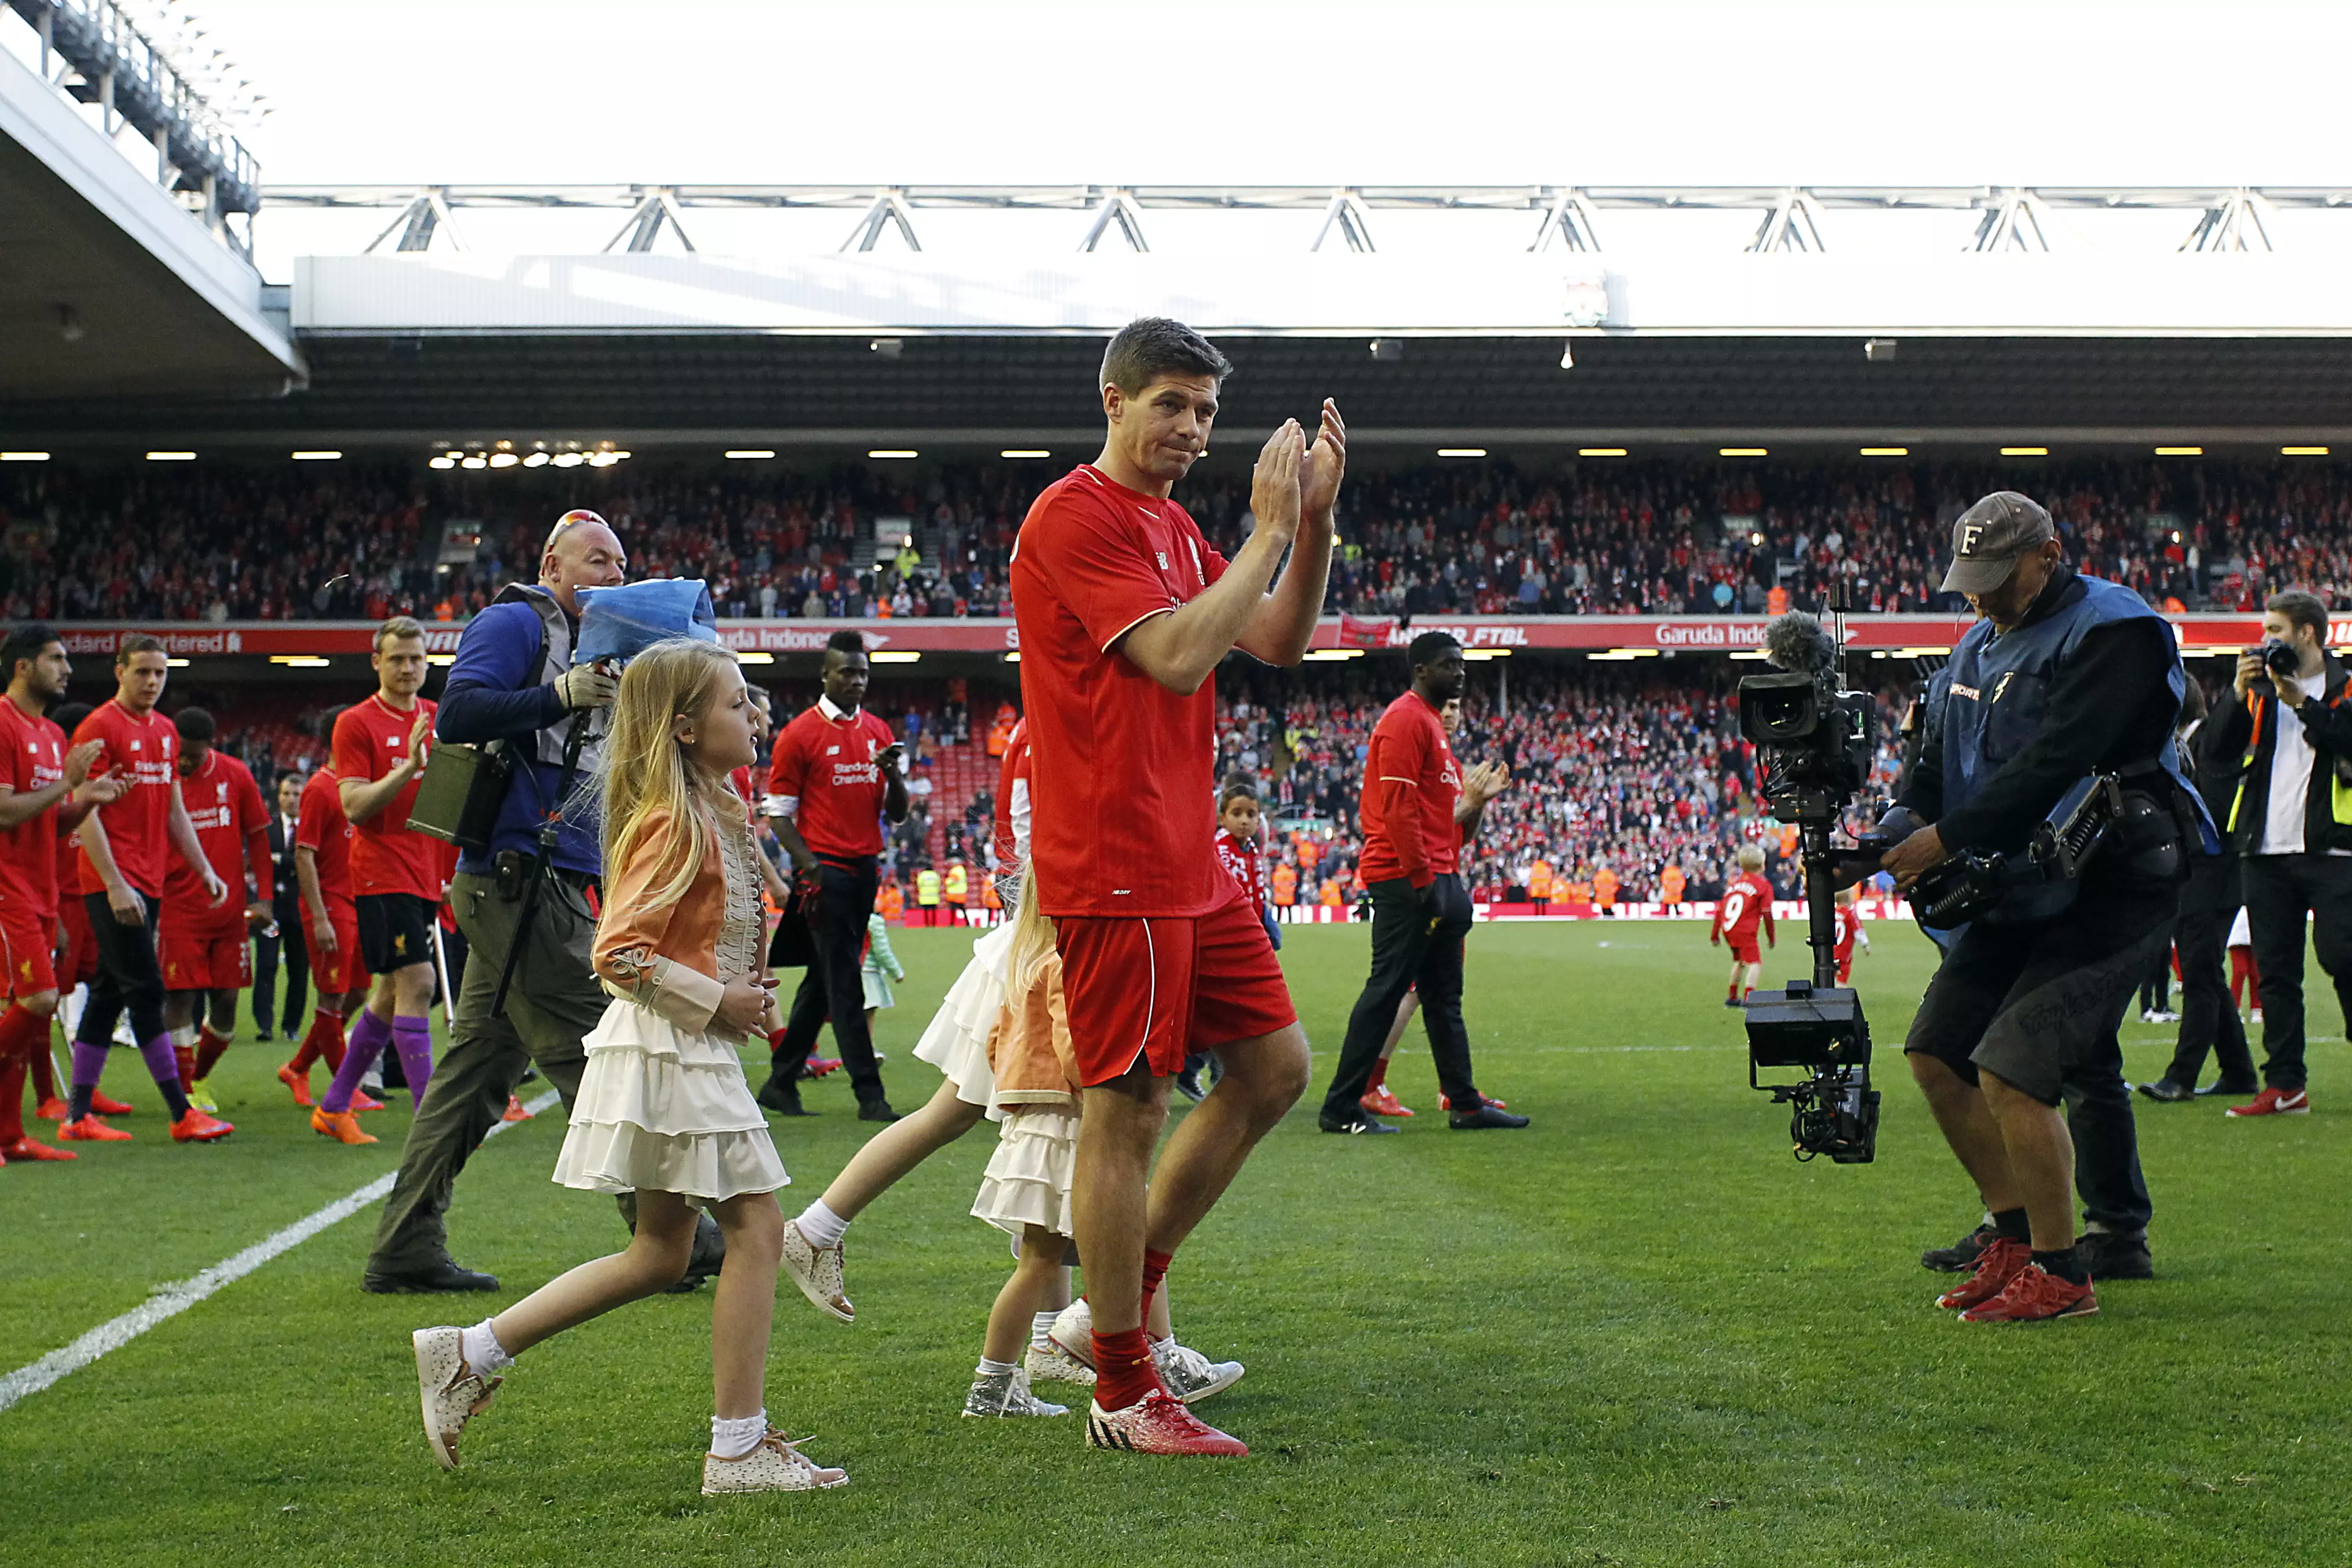 Steven Gerrard went on to make 710 appearances for Liverpool, scoring 186 goals for his boyhood club